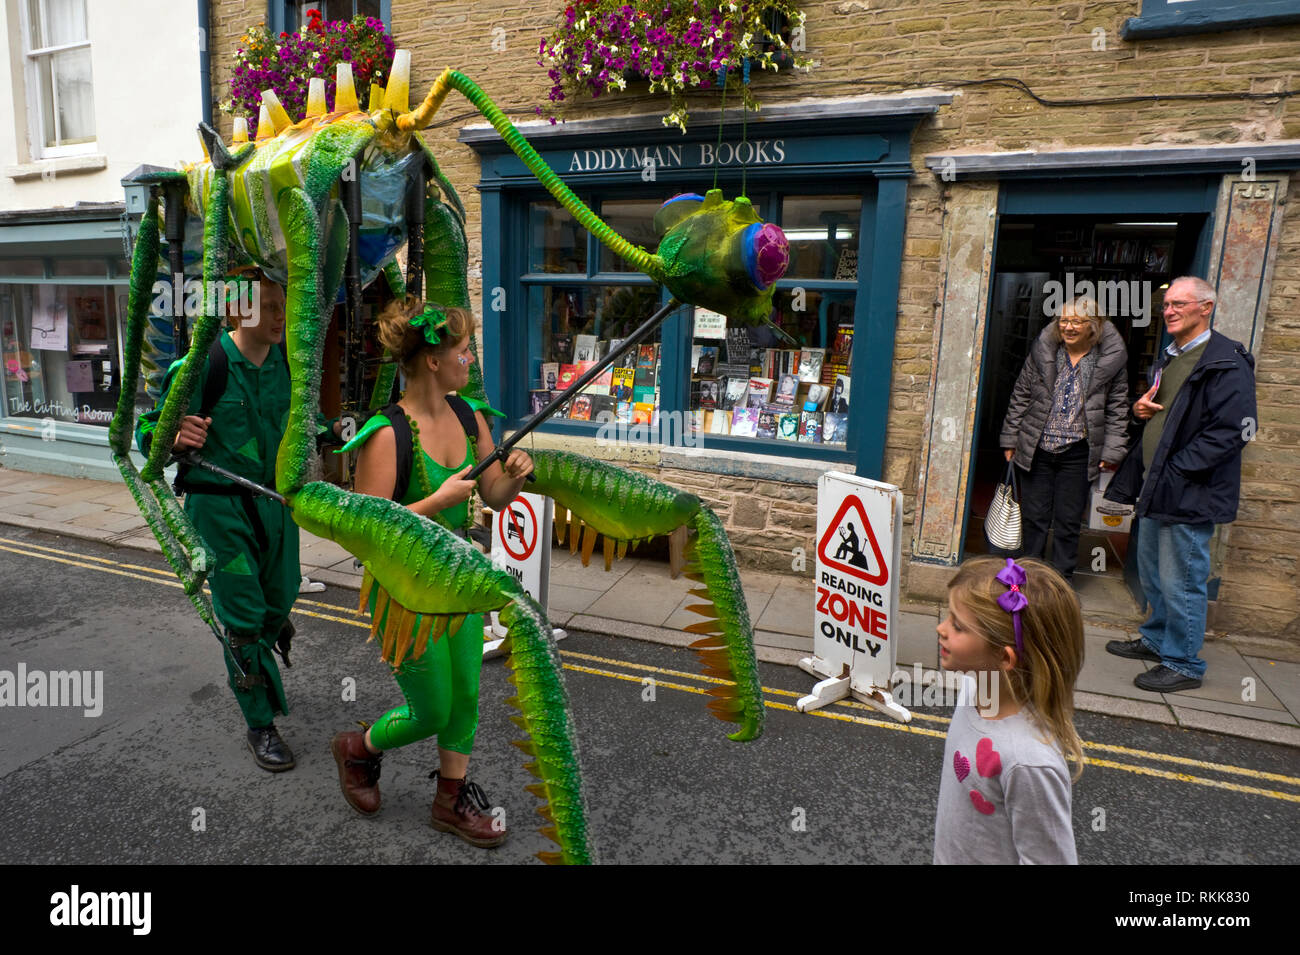 Large green praying mantis an automaton part of an art project being paraded around the town centre of Hay on Wye Powys Wales UK Stock Photo